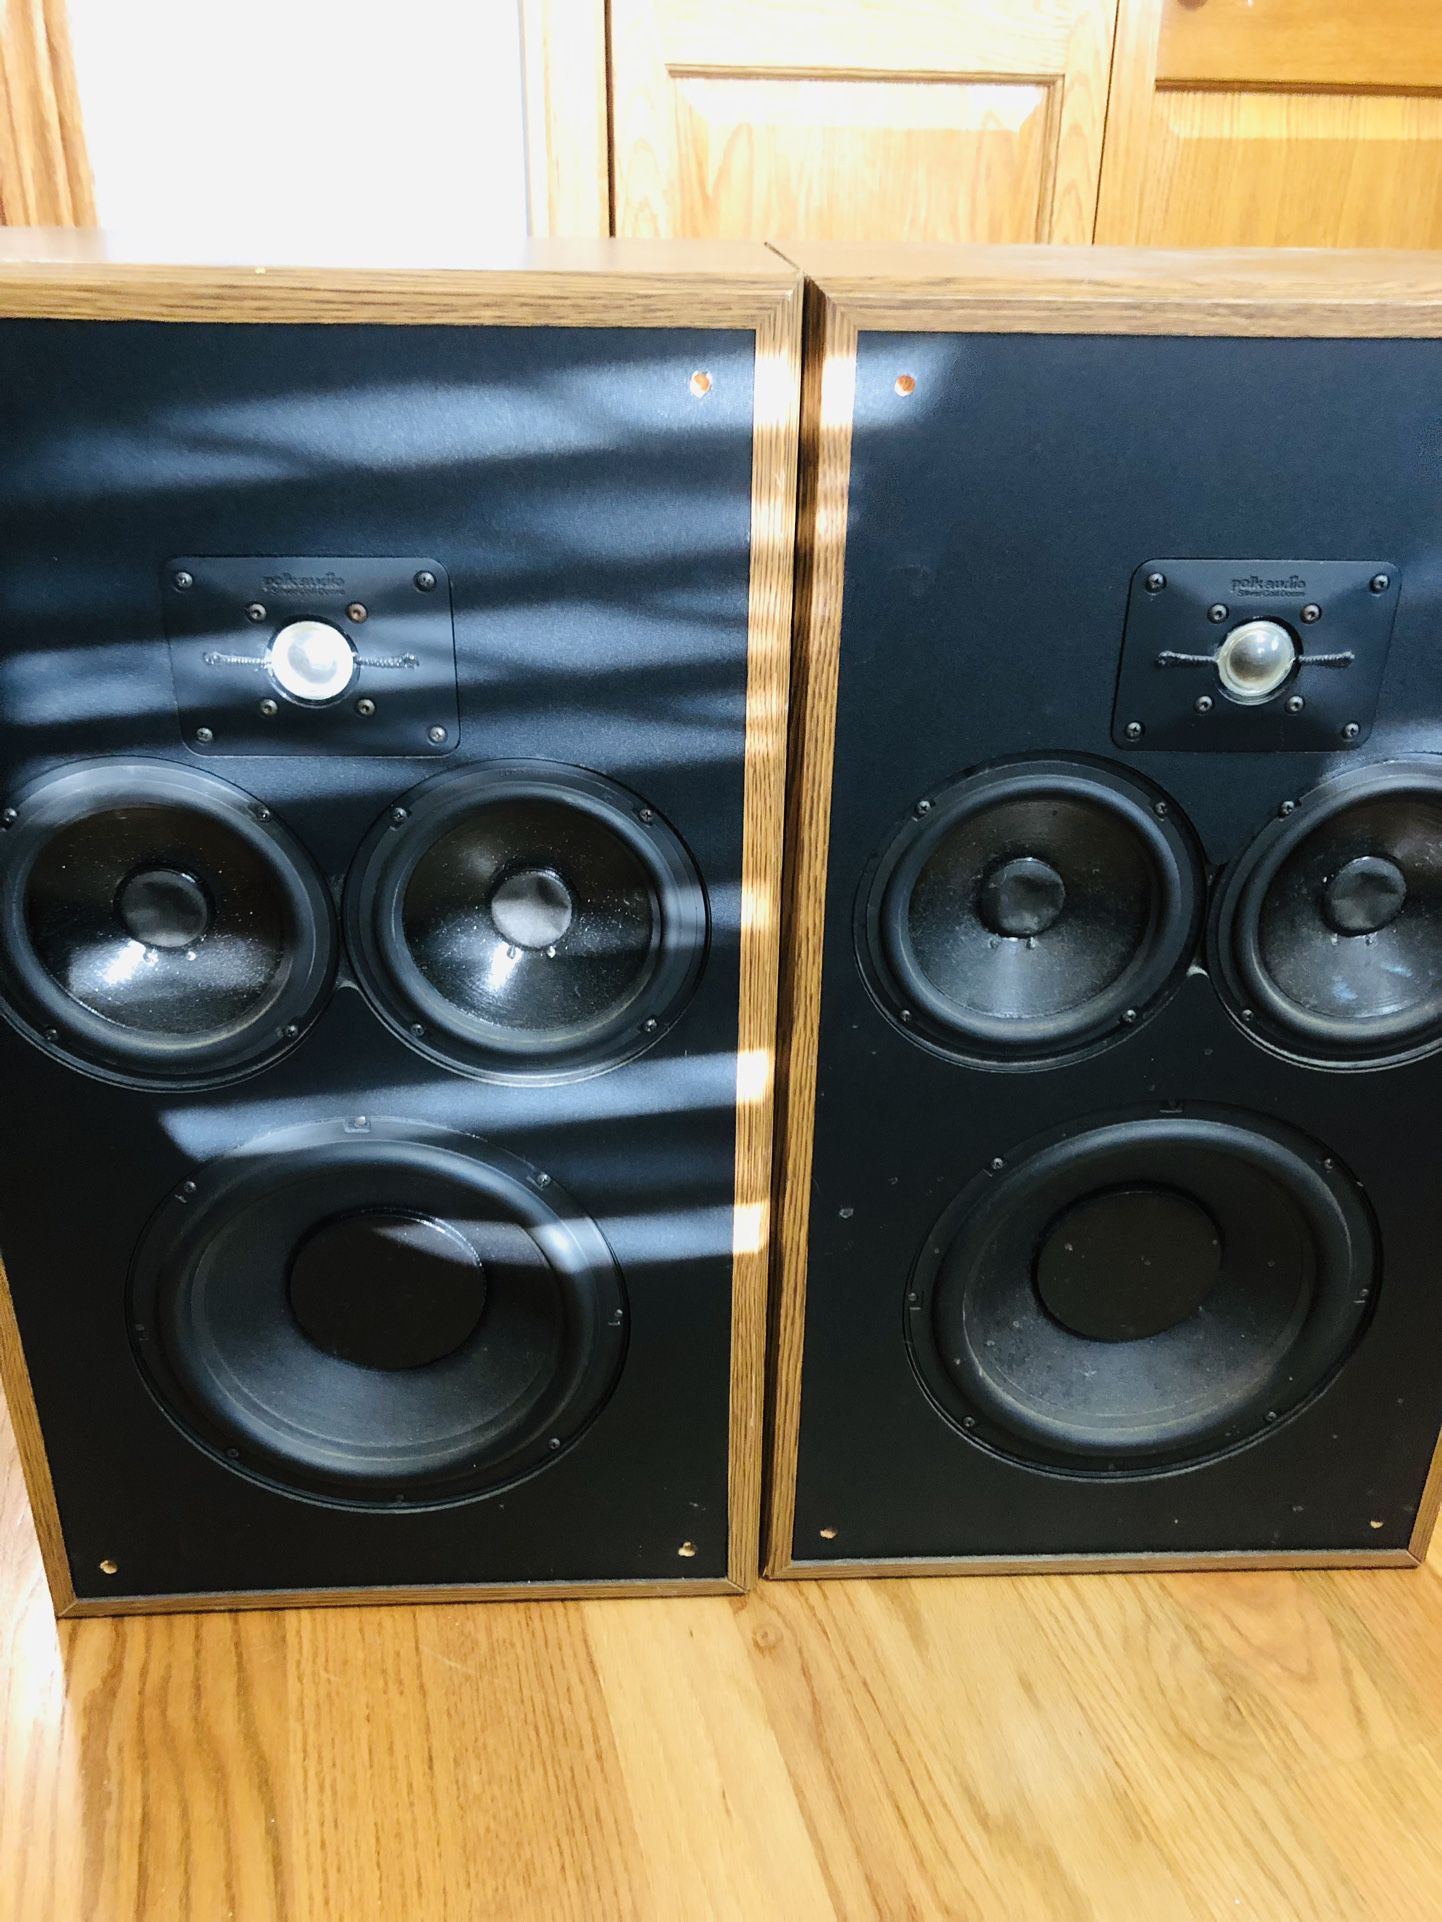 Polk audio monitor 10 ,vintage speakers,everything is working good and good condition.